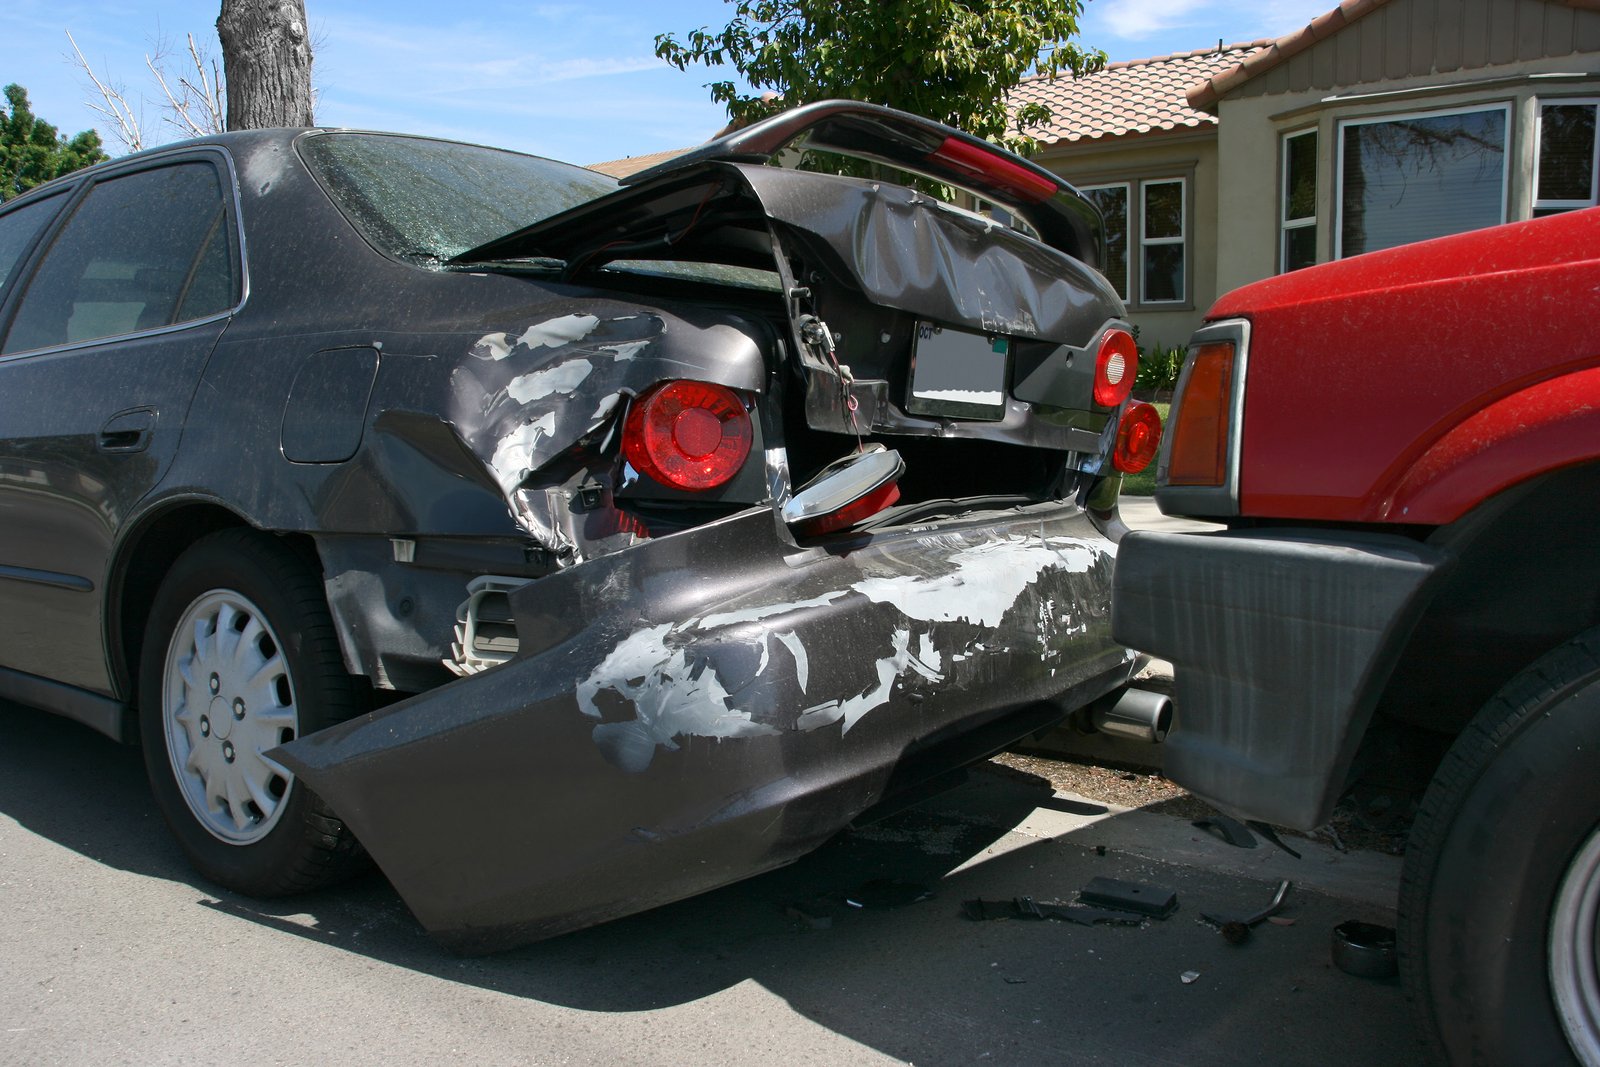 Get Your Life Back After a Car Accident Injury